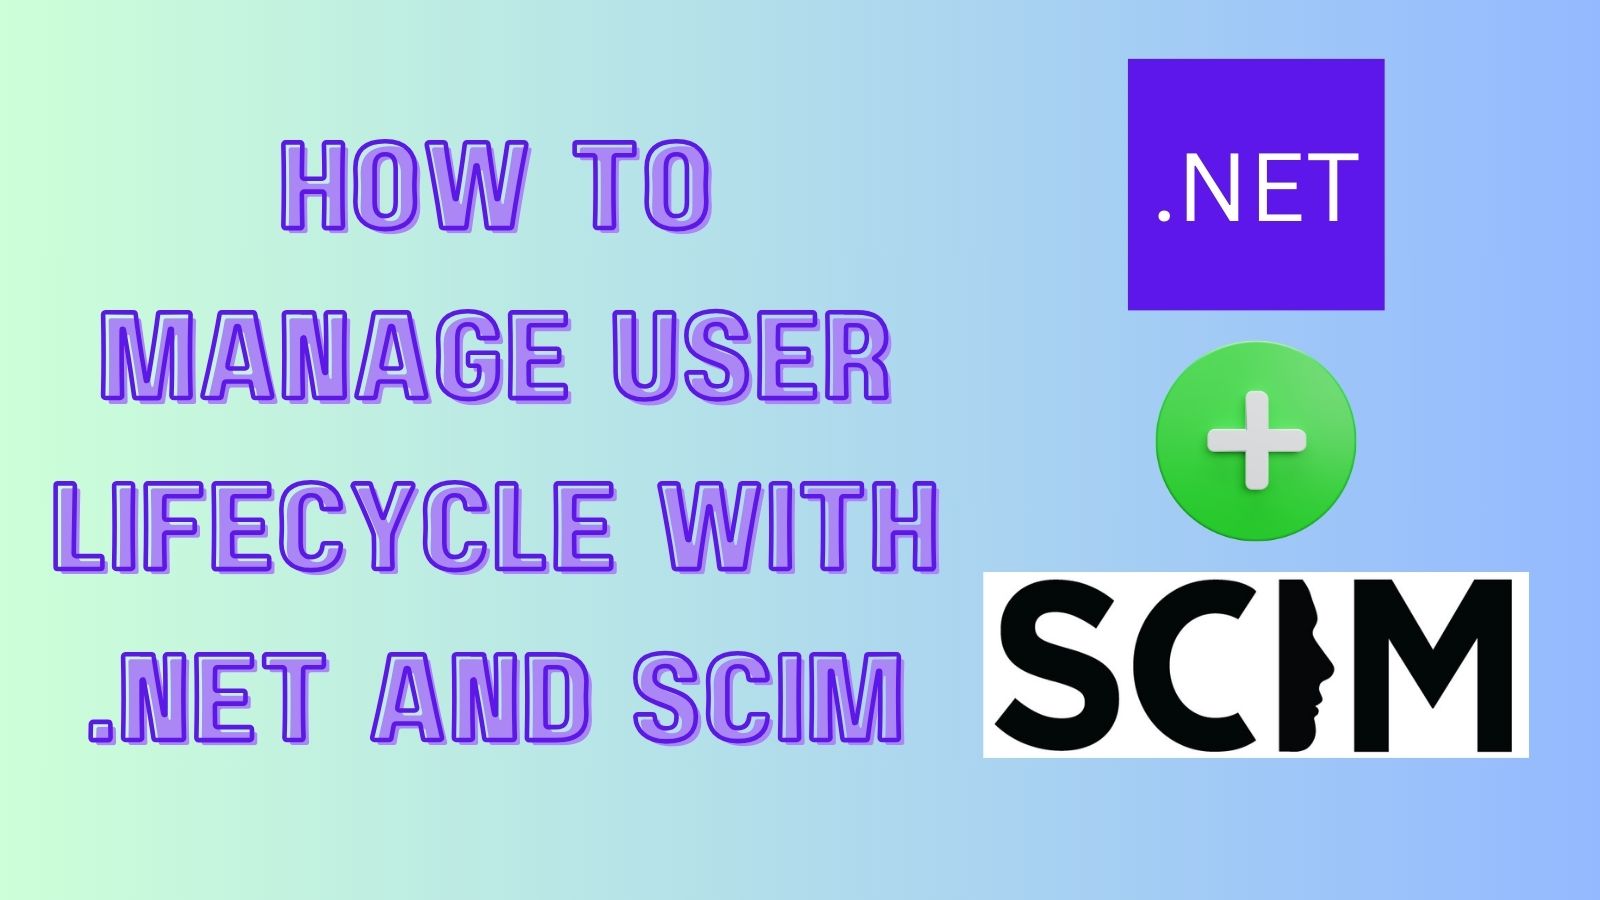 How to Manage User Lifecycle with .NET and SCIM